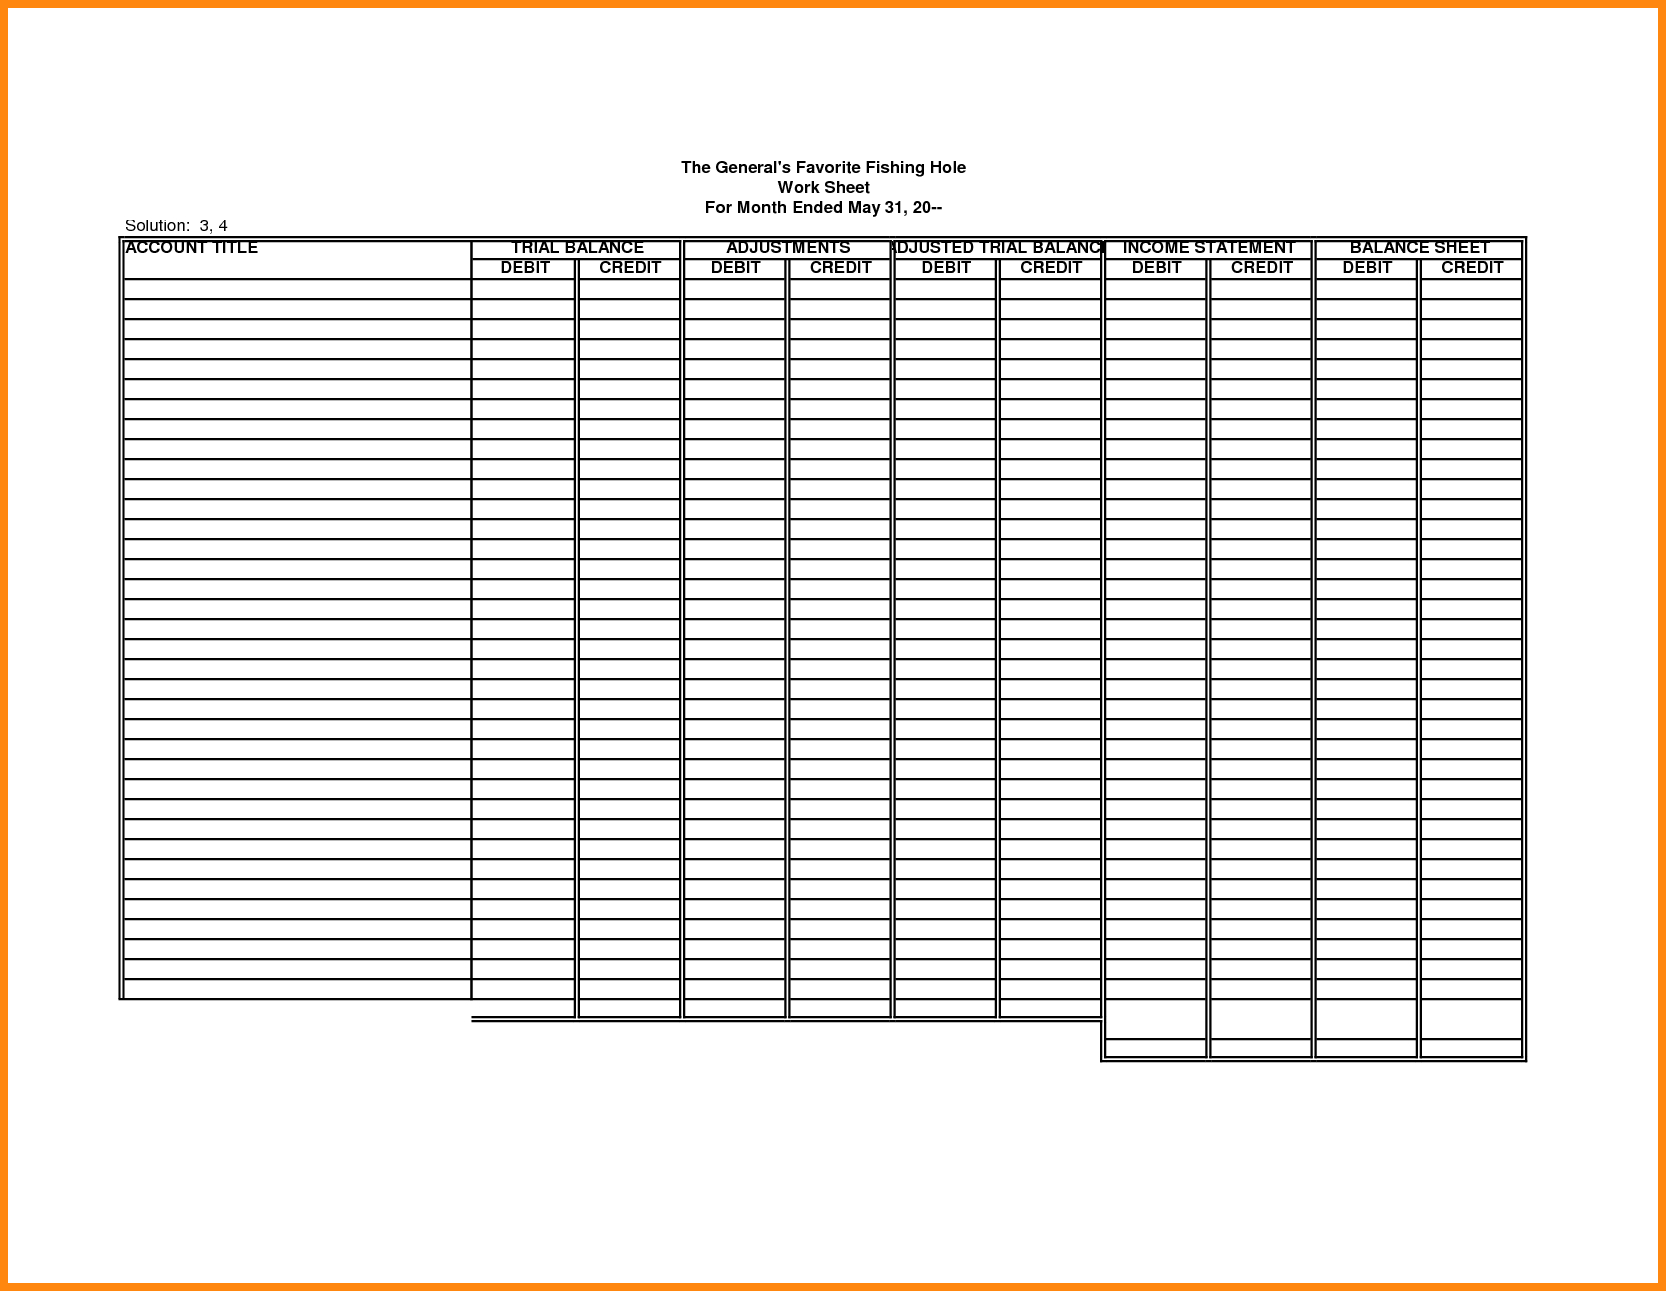 blank-accounting-worksheet-template-1-down-town-ken-more-throughout-accounting-worksheet-db